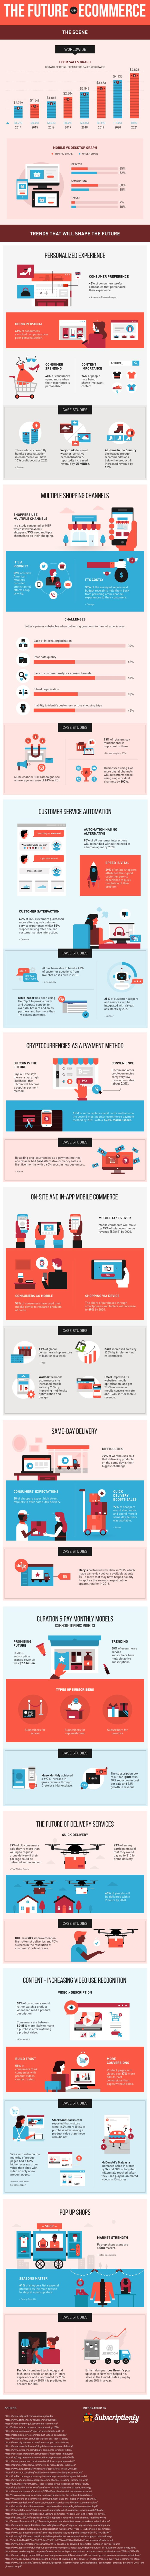 Future of eCommerce Infographic